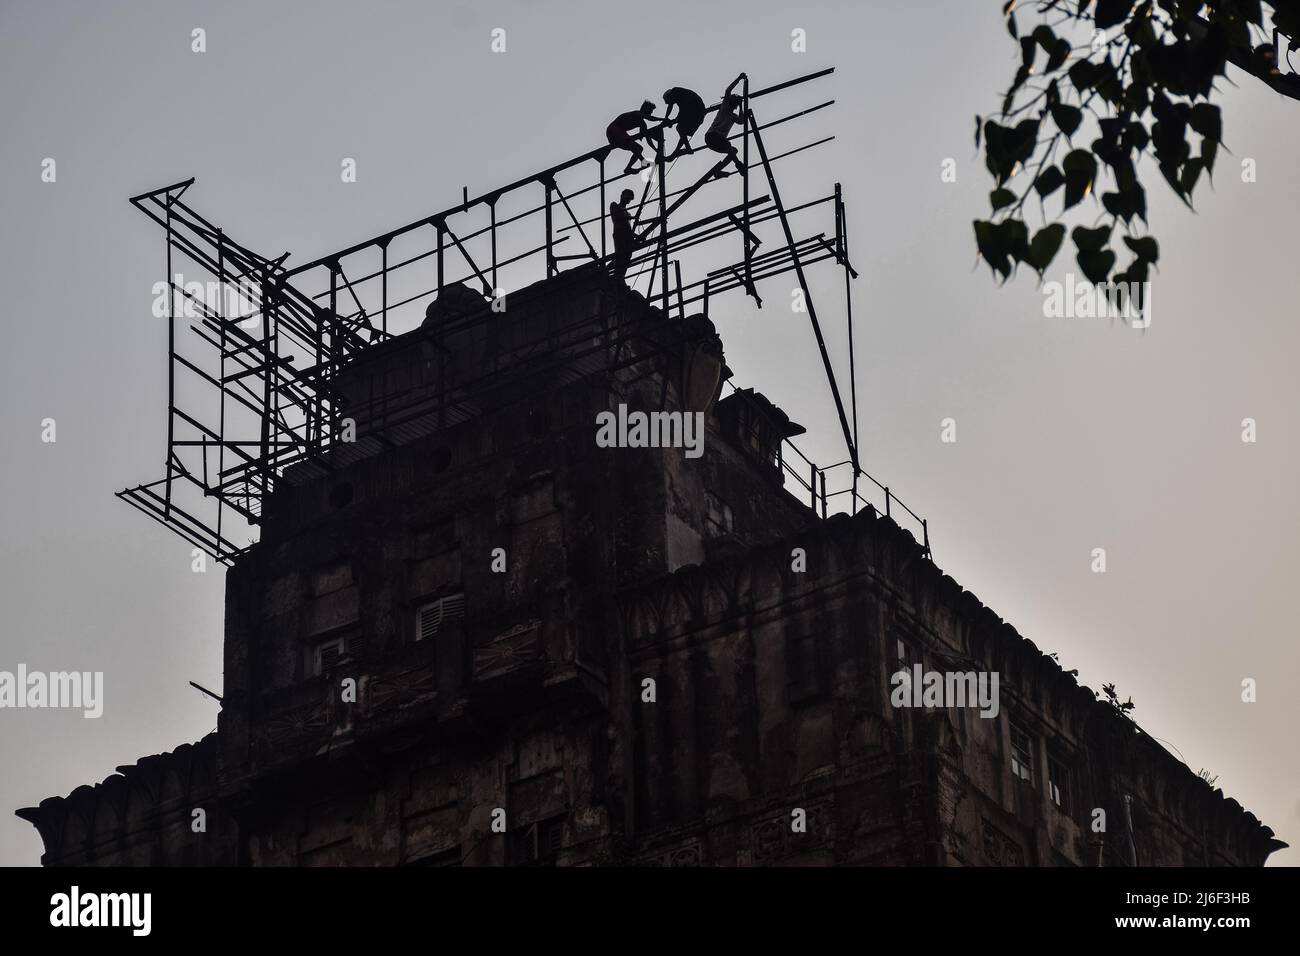 May 1, 2022, Rajpur Sonarpur, West Bengal, India: Indian labourers work to fix a billboard structure on top of a building in Kolkata on International Workers' Day 2022. (Credit Image: © Sankhadeep Banerjee/ZUMA Press Wire) Stock Photo